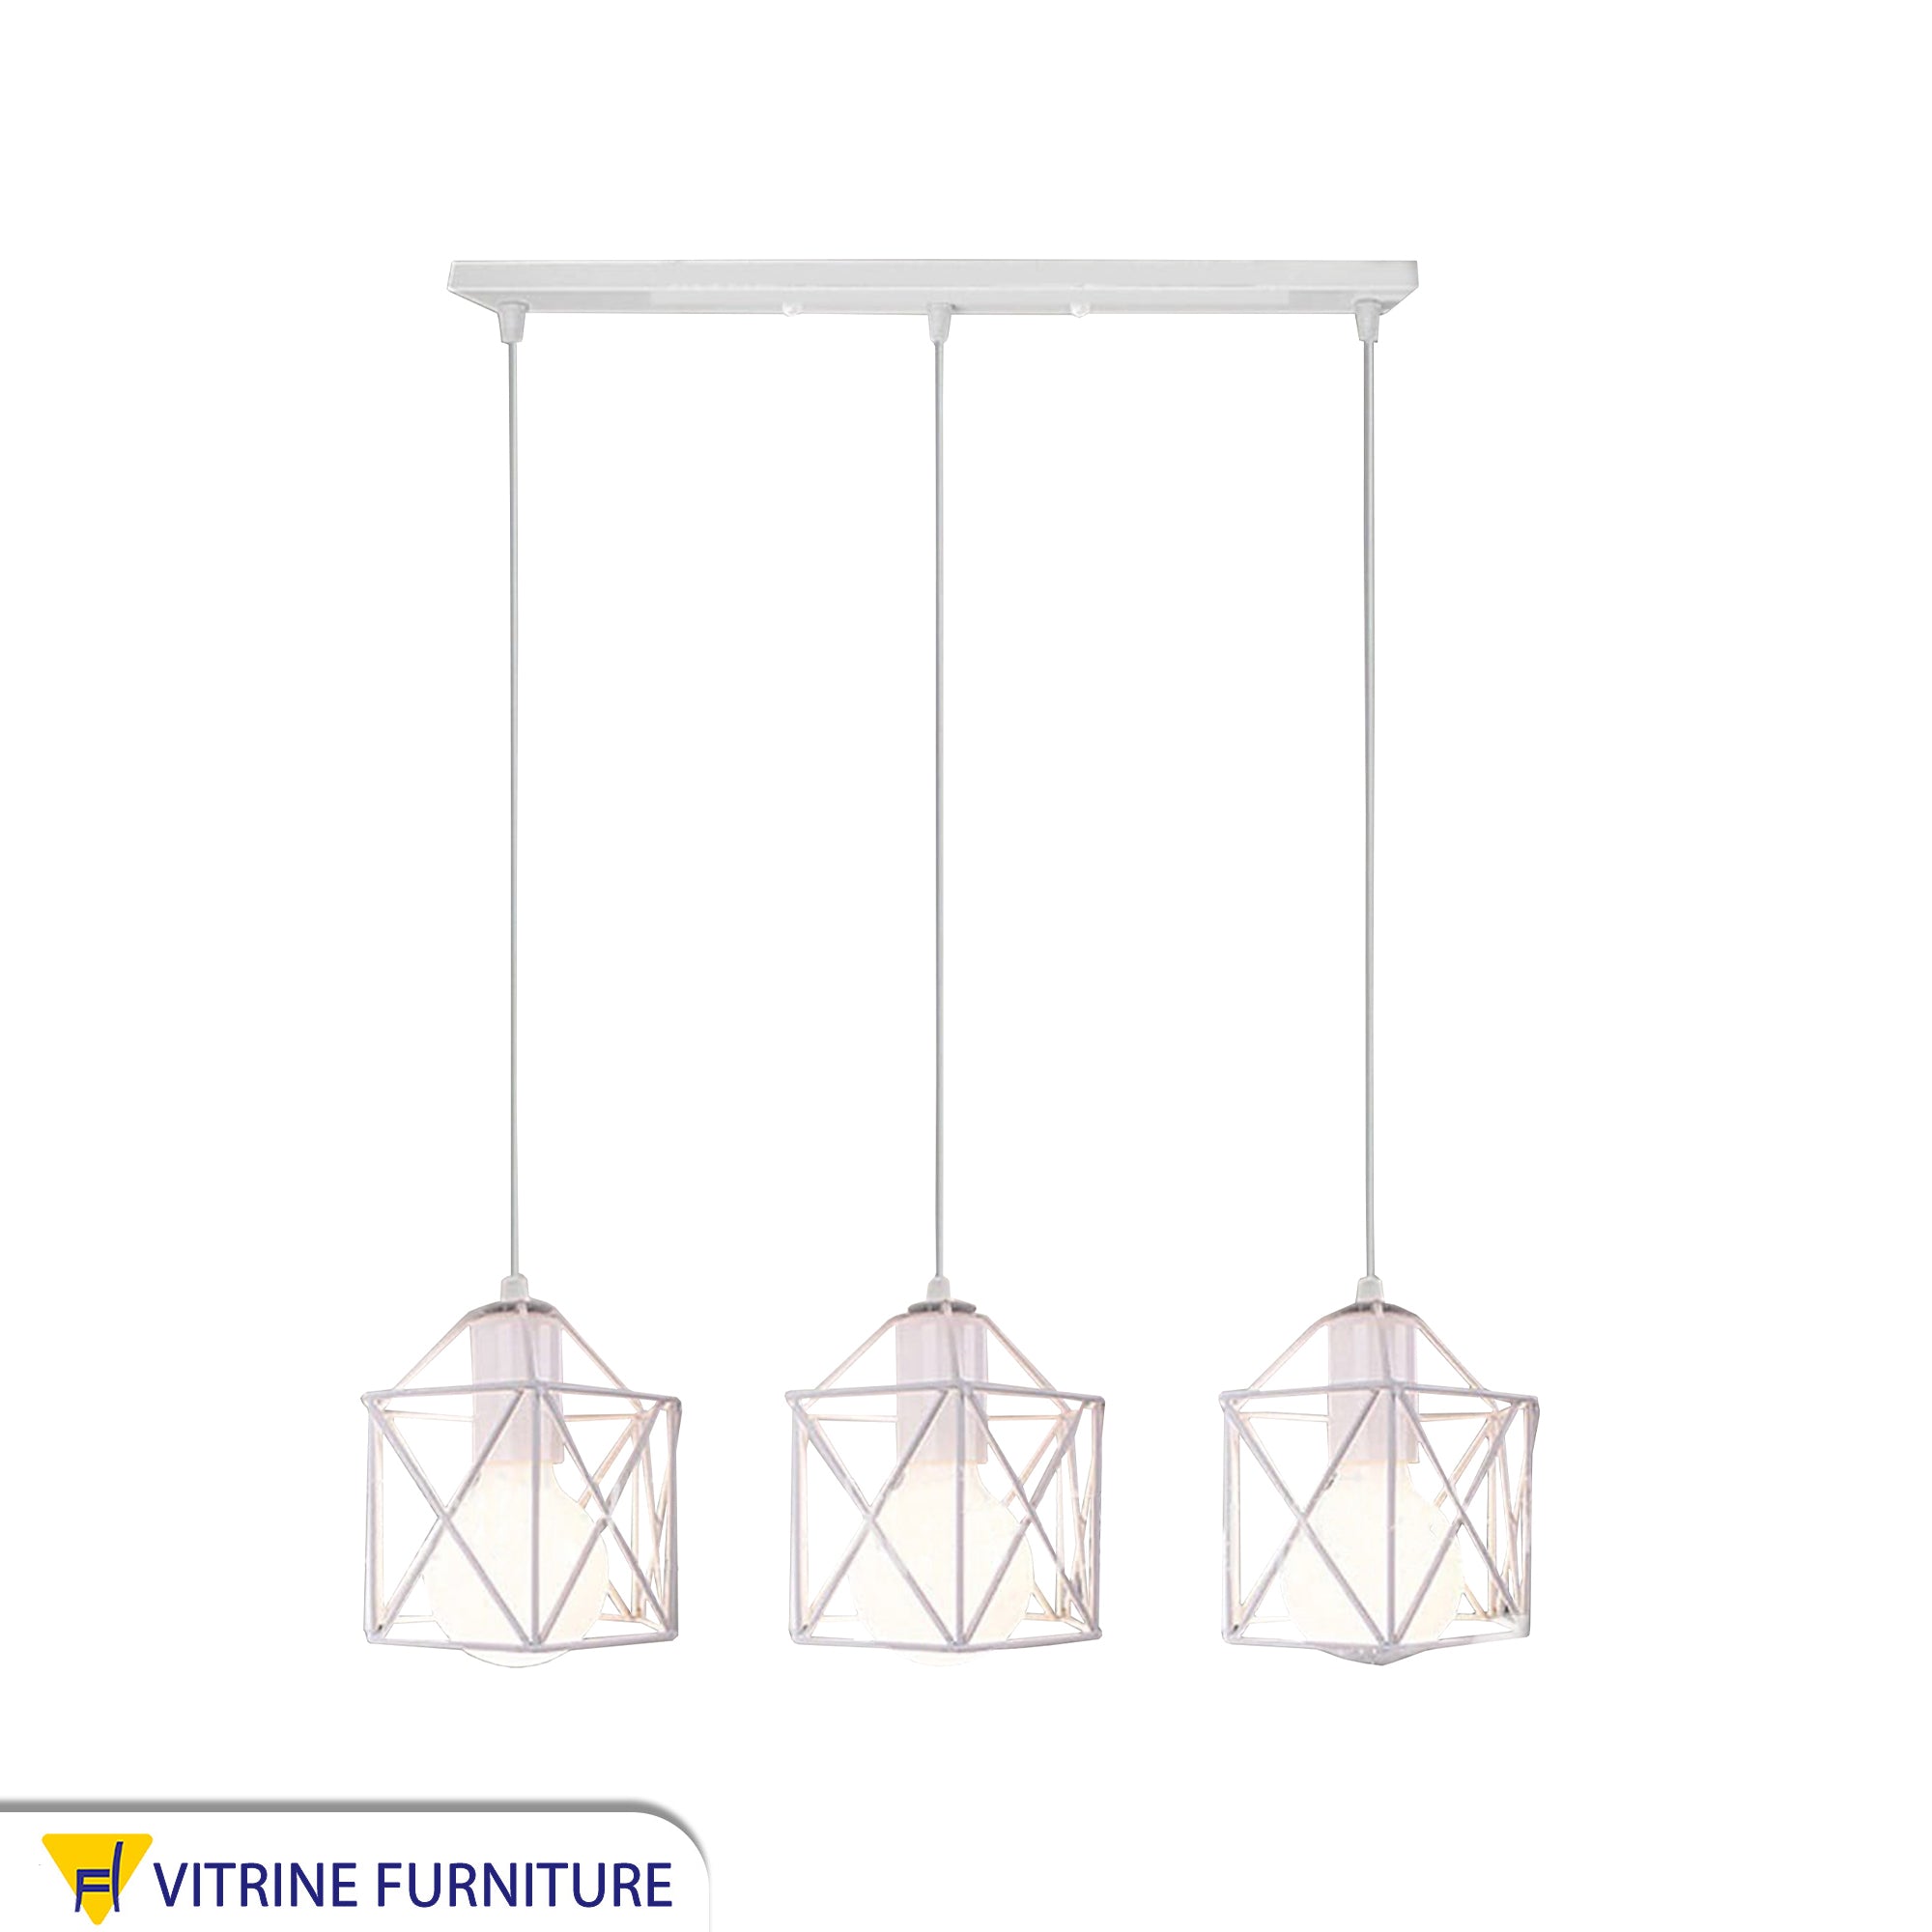 Chandelier with a white metal frame, X-cage shape